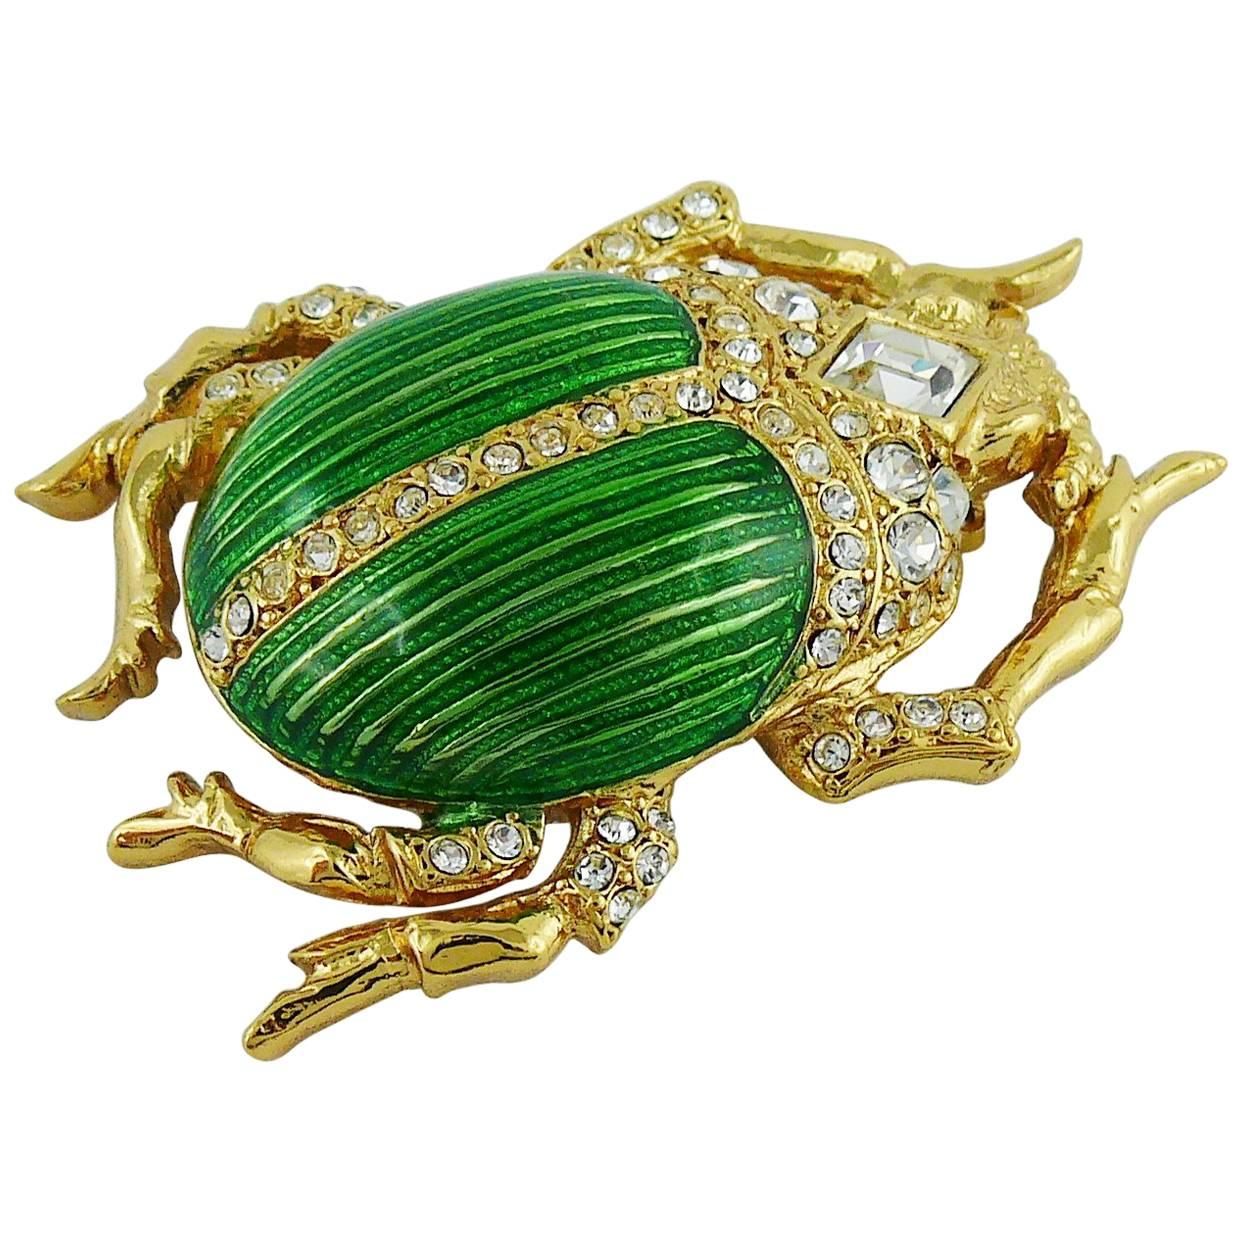 Christian Dior Boutique Vintage Jewelled Scarab Brooch